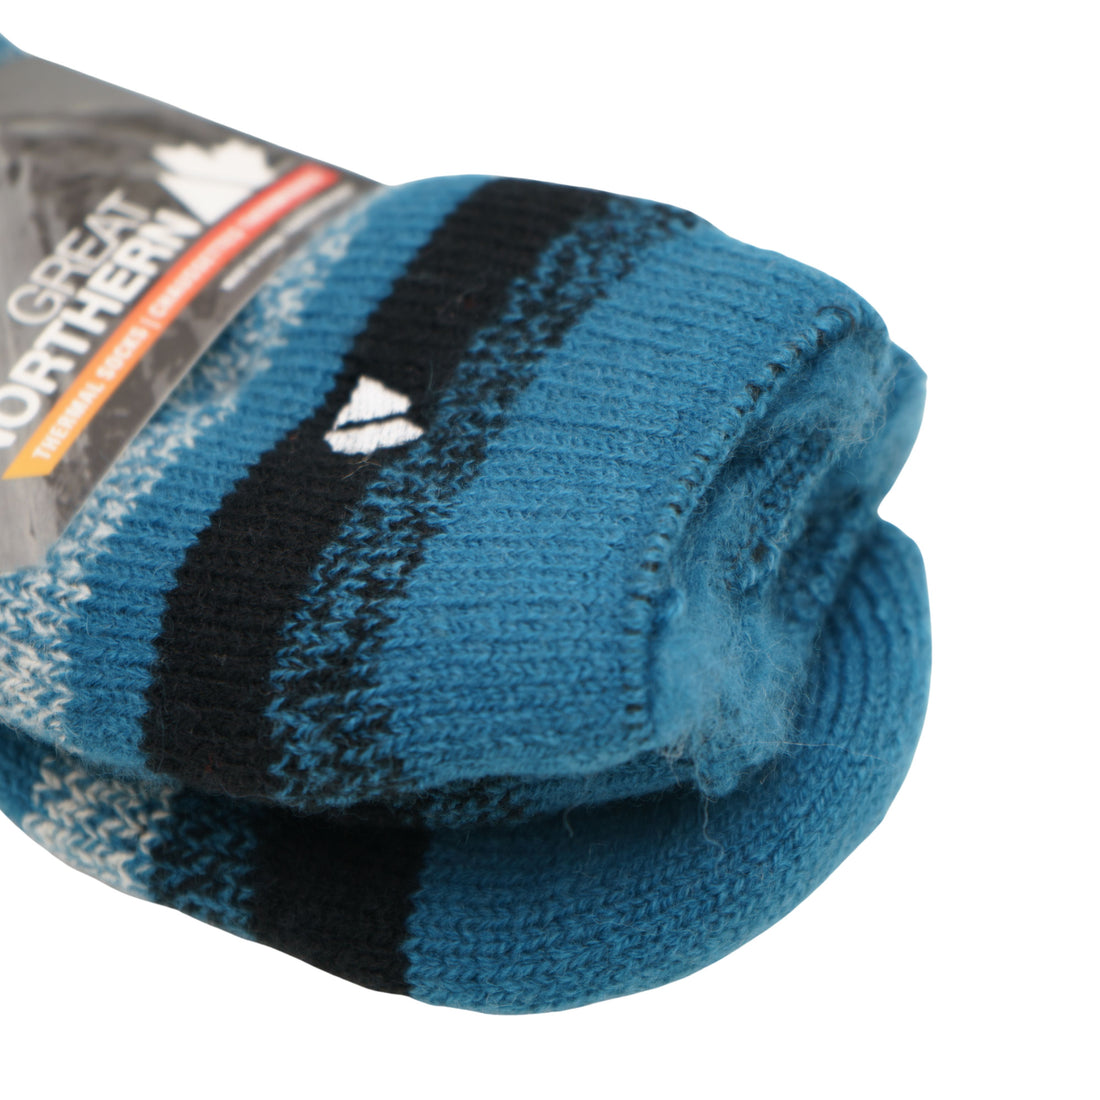 Great Northern: Comfy Winter Gear & Socks with Technical Fabrics